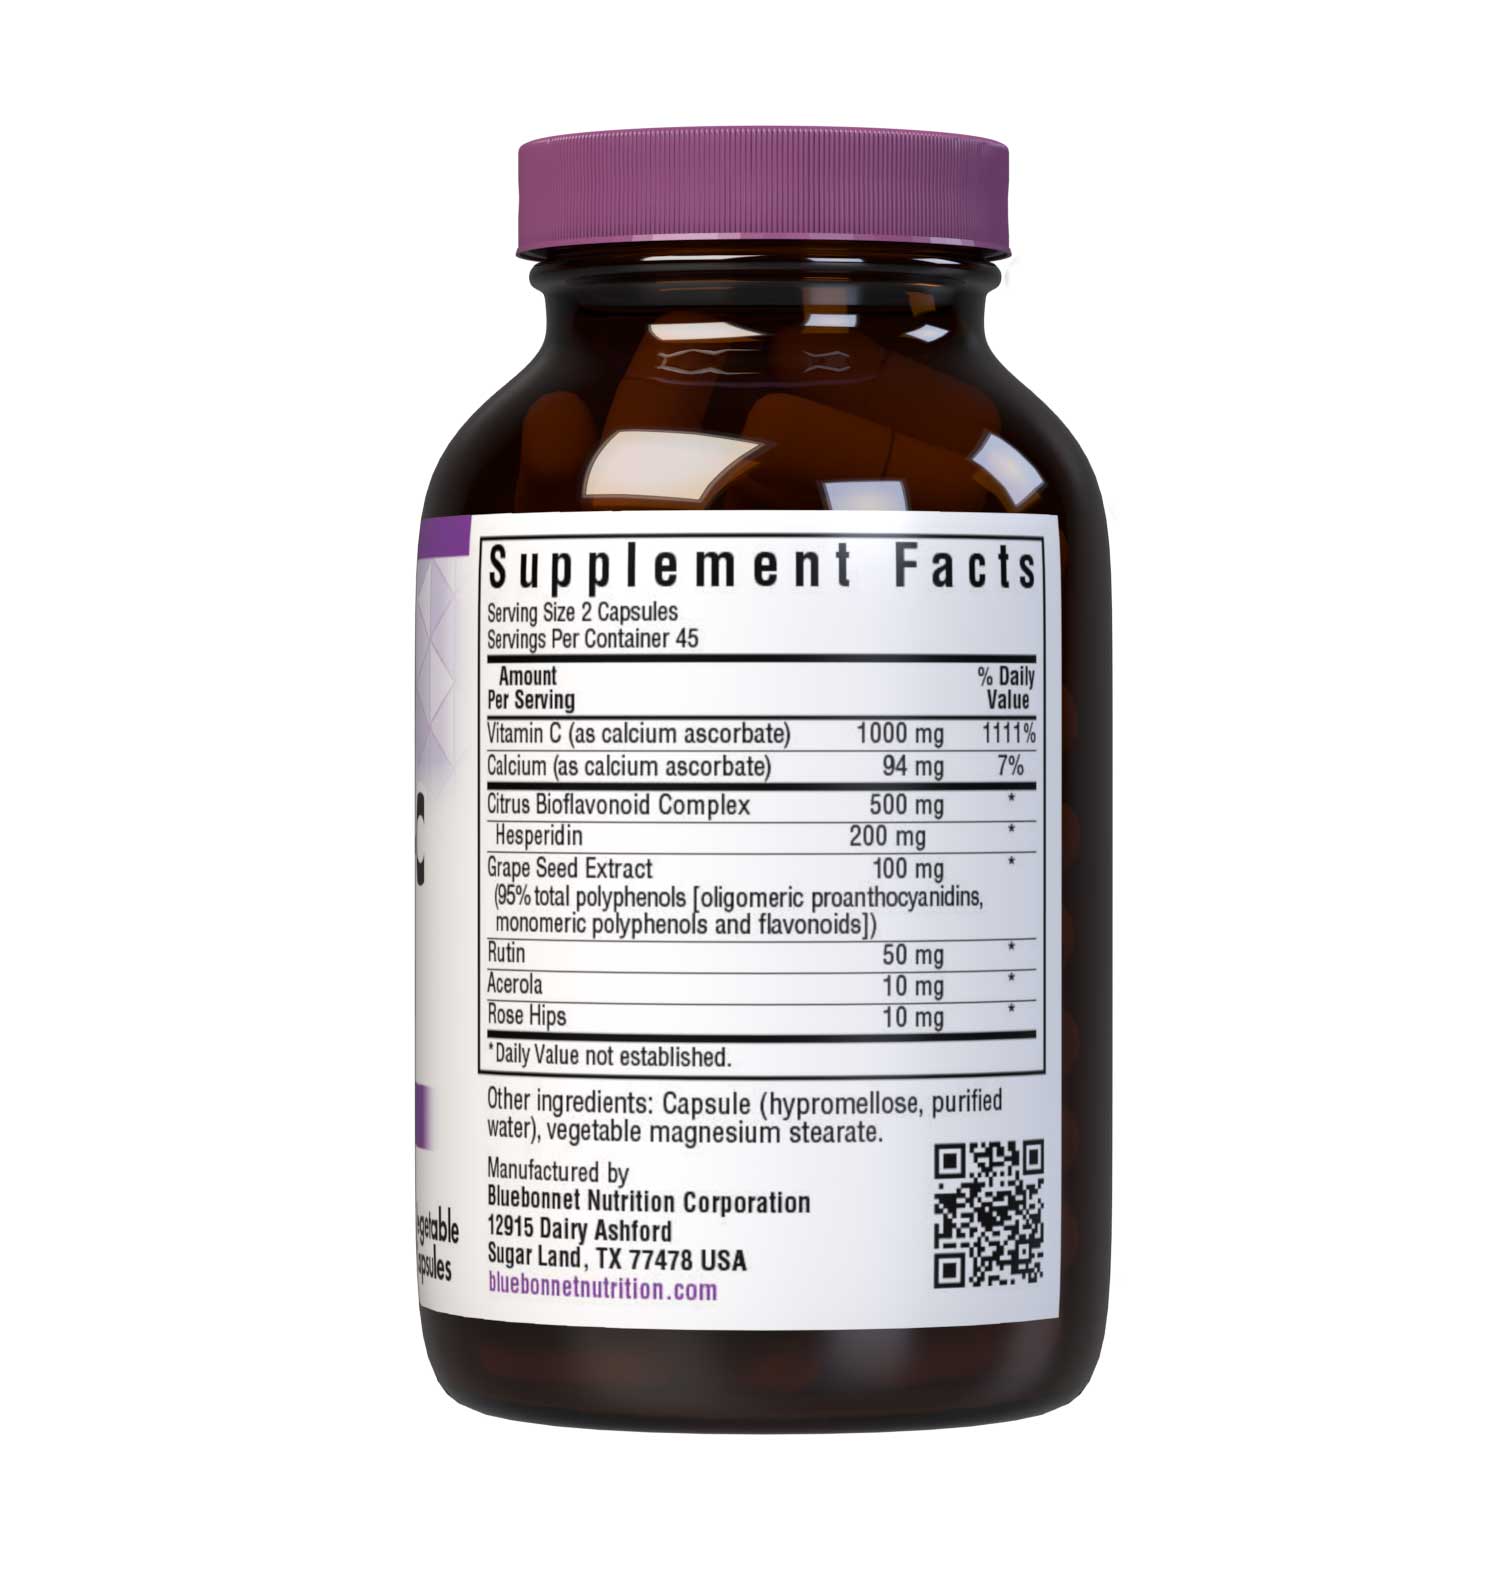 Bluebonnet’s Optimum-C Formula 90 Vegetable Capsules are formulated with non-GMO, identity preserved (IP) vitamin C from calcium ascorbate, rose hips and acerola along with citrus bioflavonoids and grape seed extract to help support immune function. Supplement facts panel. #size_90 count